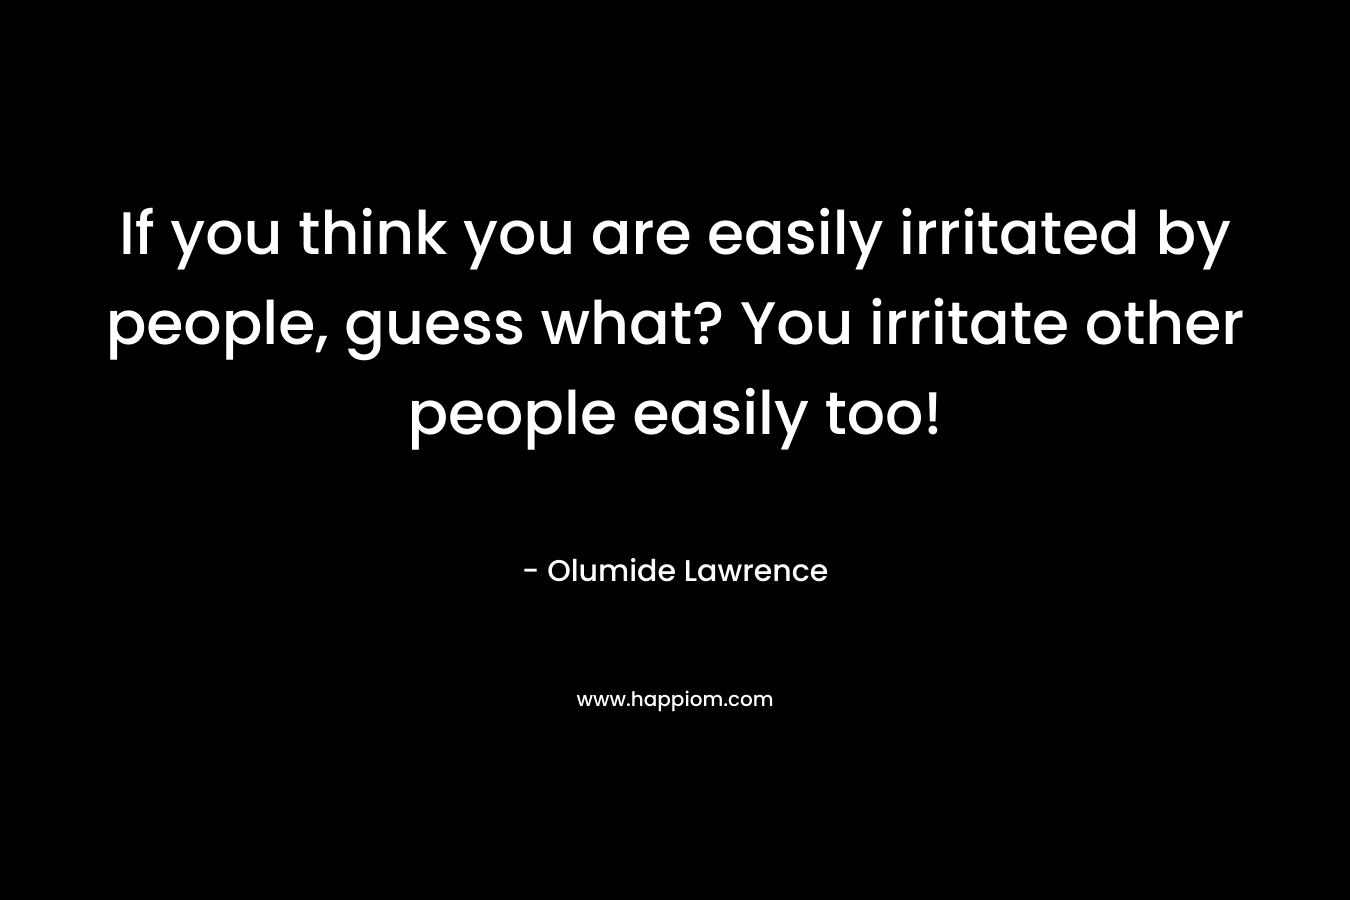 If you think you are easily irritated by people, guess what? You irritate other people easily too!